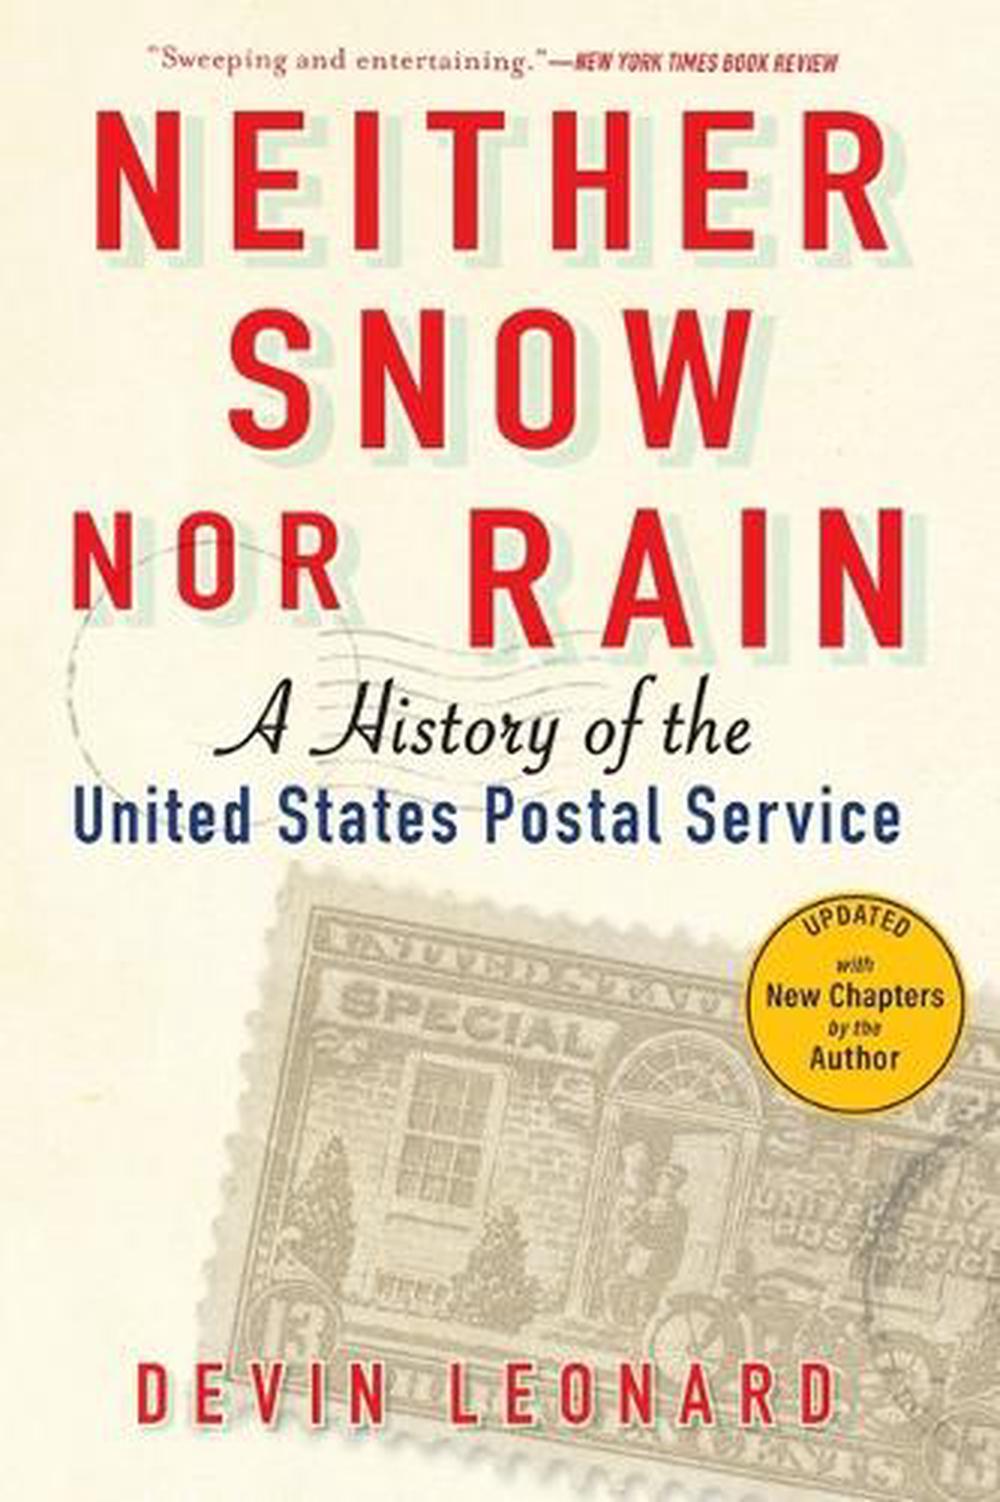 Neither Snow nor Rain: A History of the United States Postal Service by Devin Le